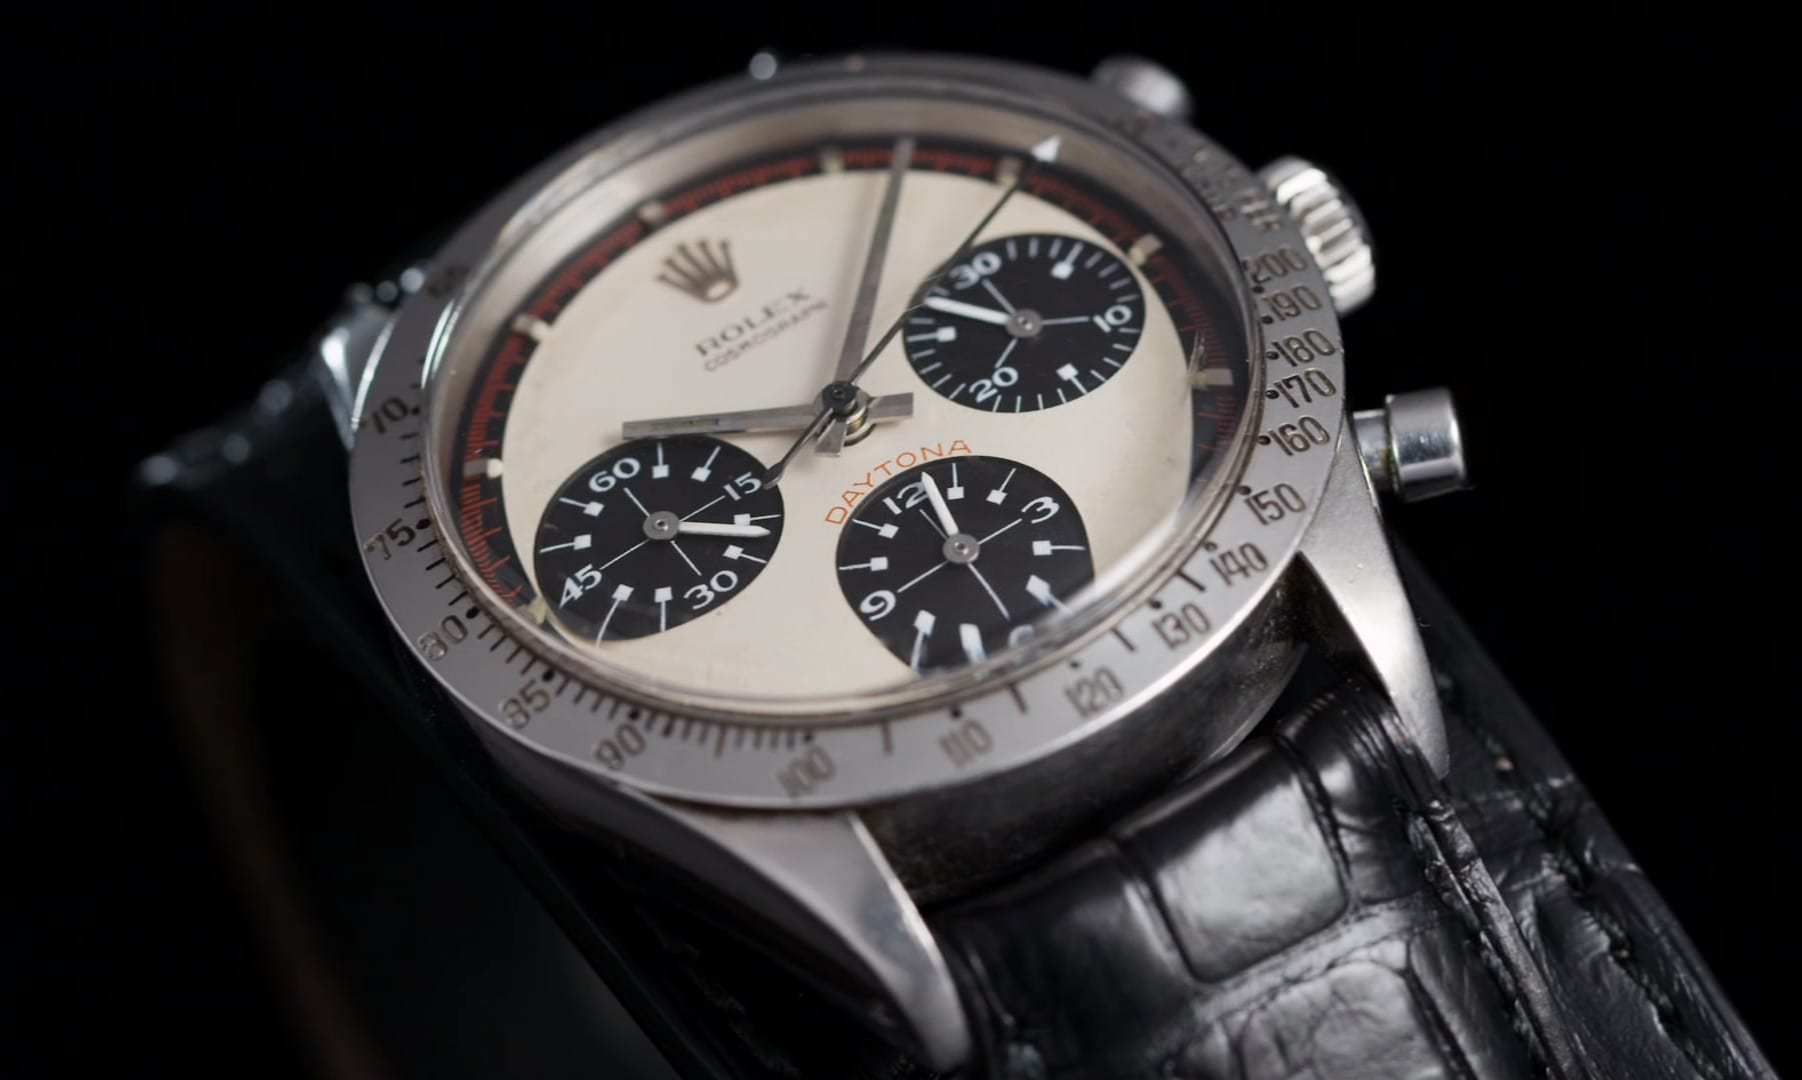 most expensive rolex watch sold at auction